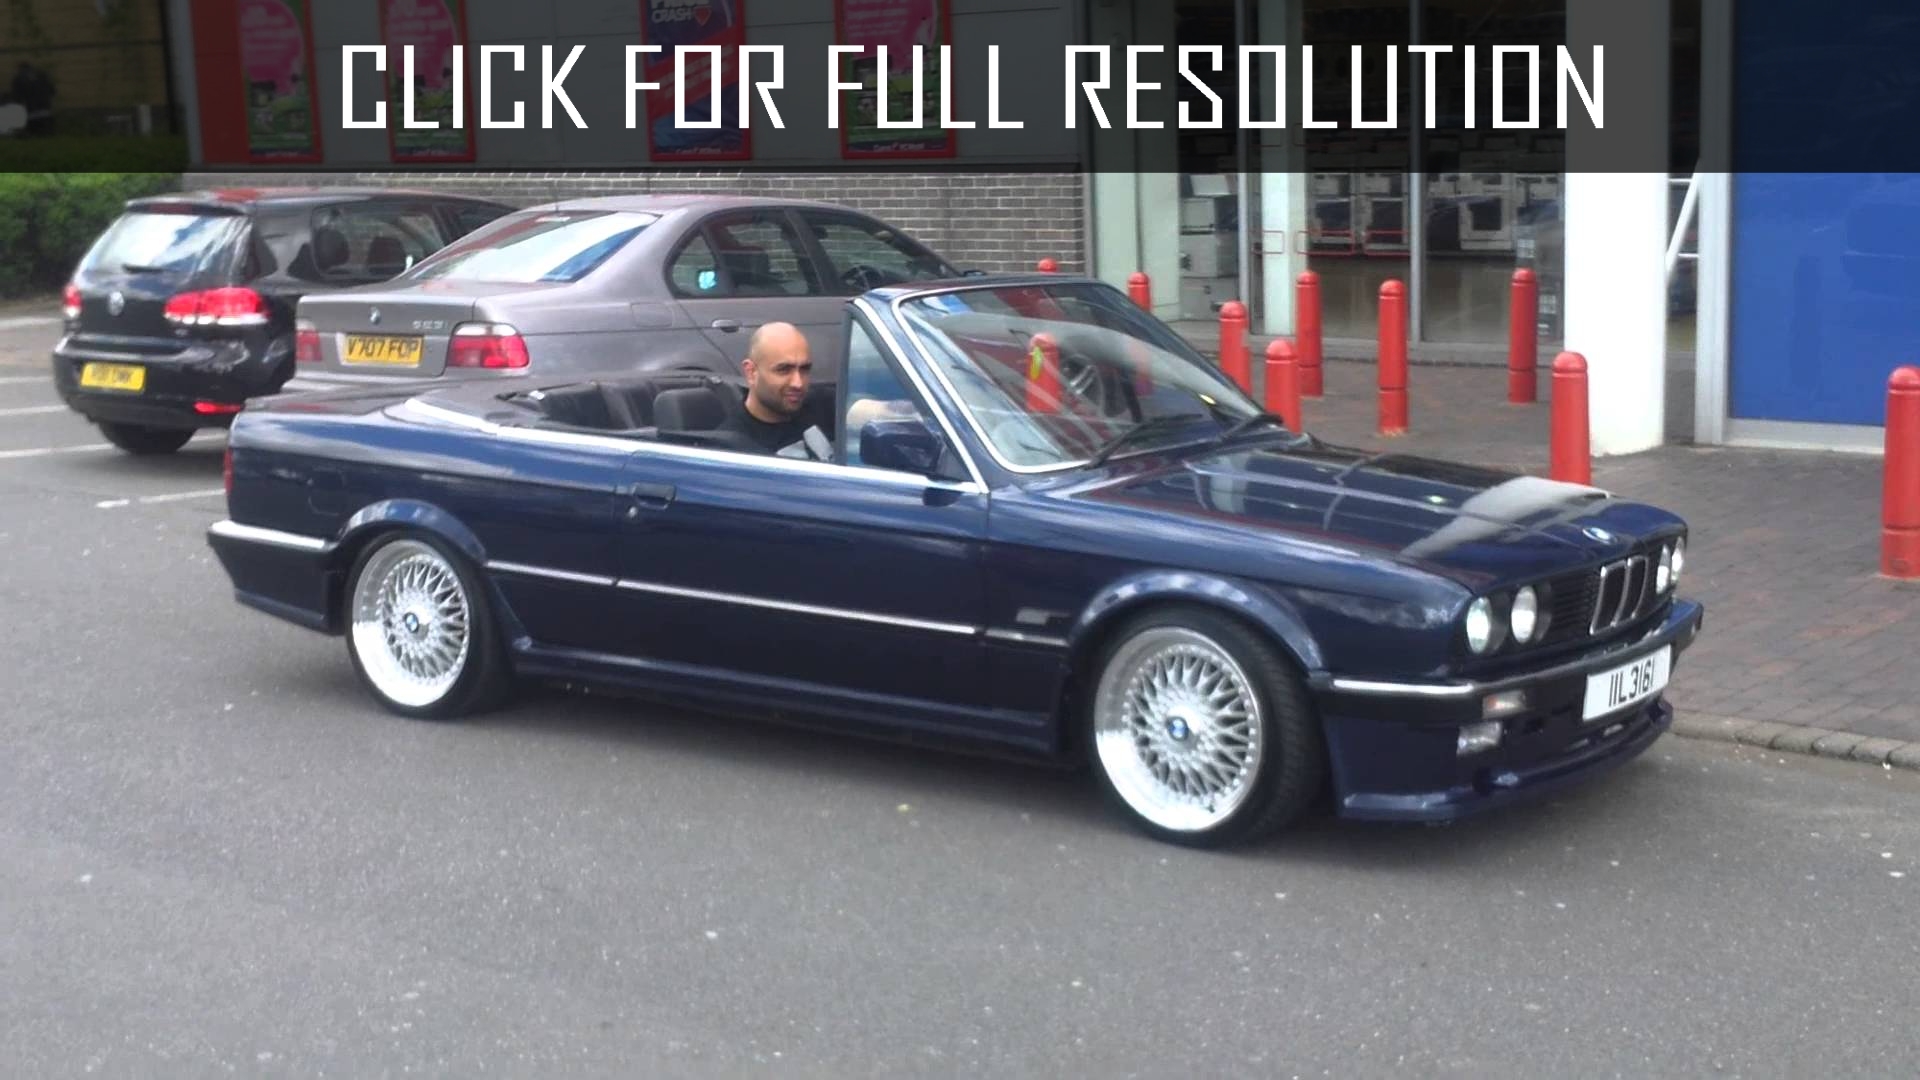 Bmw E30 Convertible Top Amazing Photo Gallery Some Information And